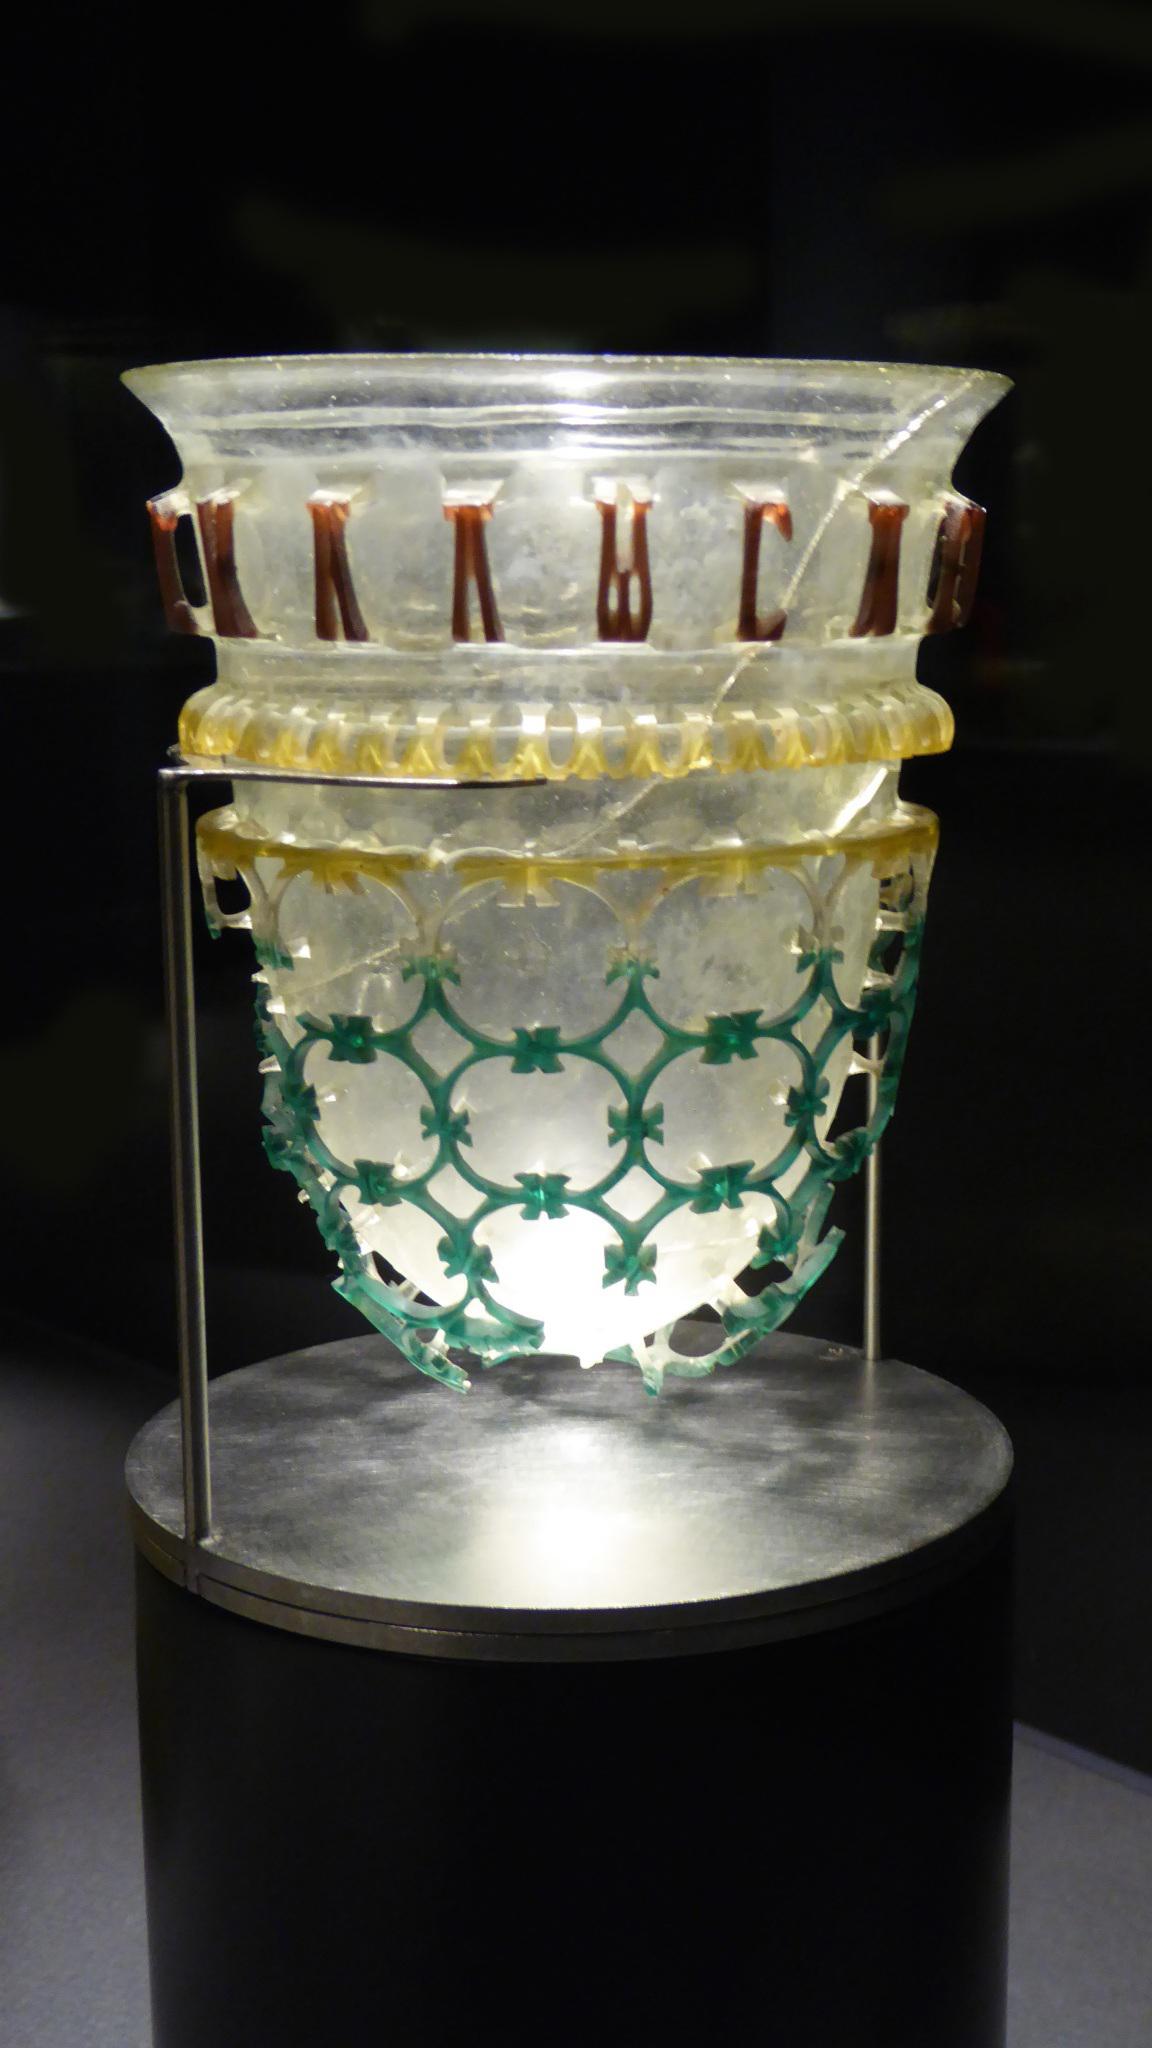 A Roman glass cage cup, found in Cologne, Germany. 4th century CE, now on display at the Roman-Germanic Museum in Cologne.jpg